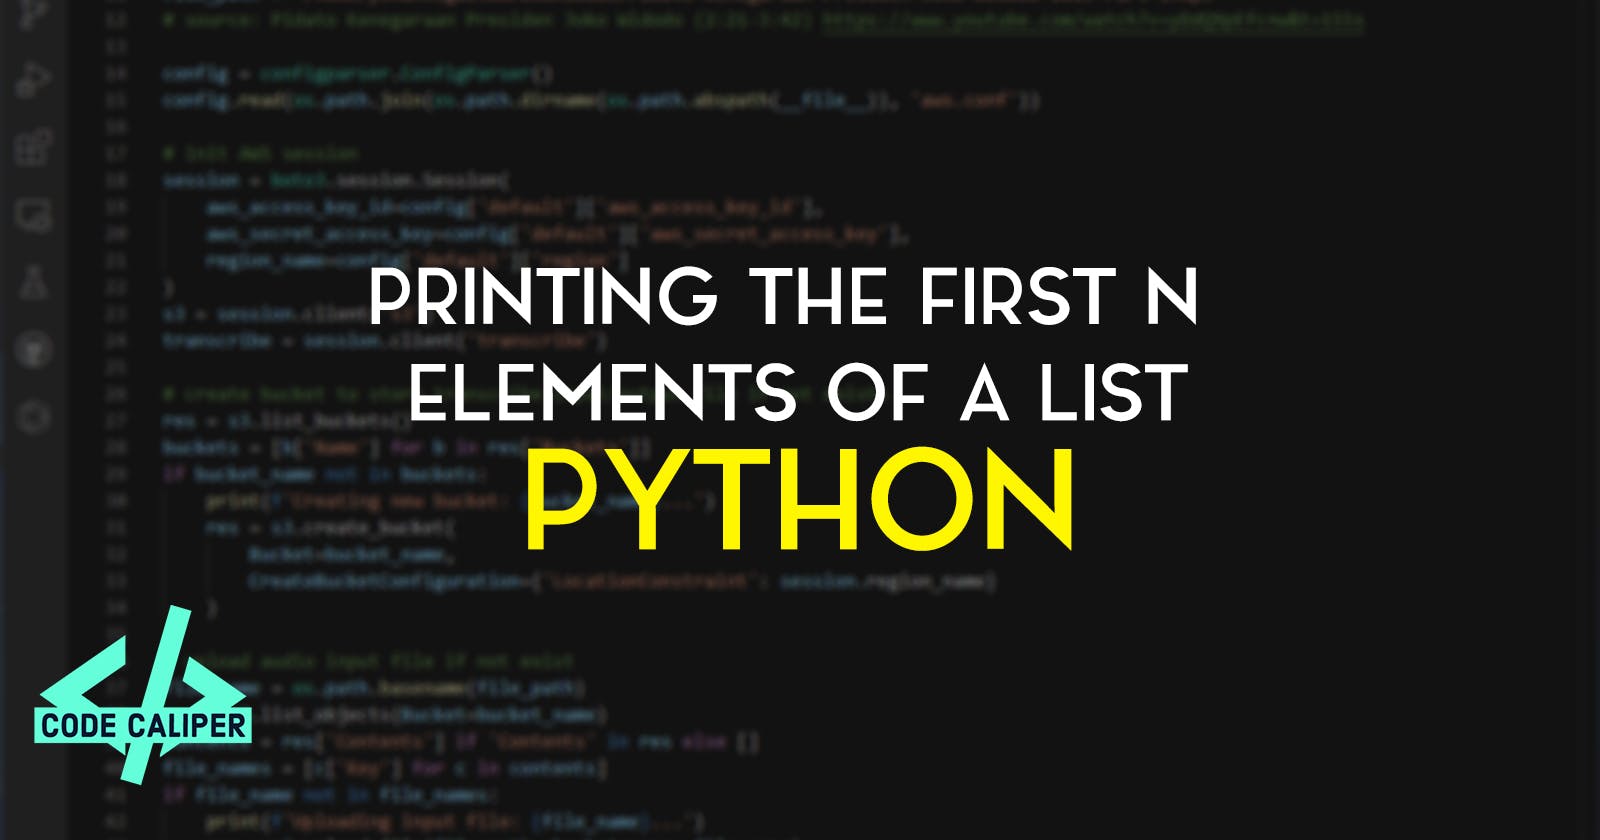 Printing the First N Elements of a List in Python